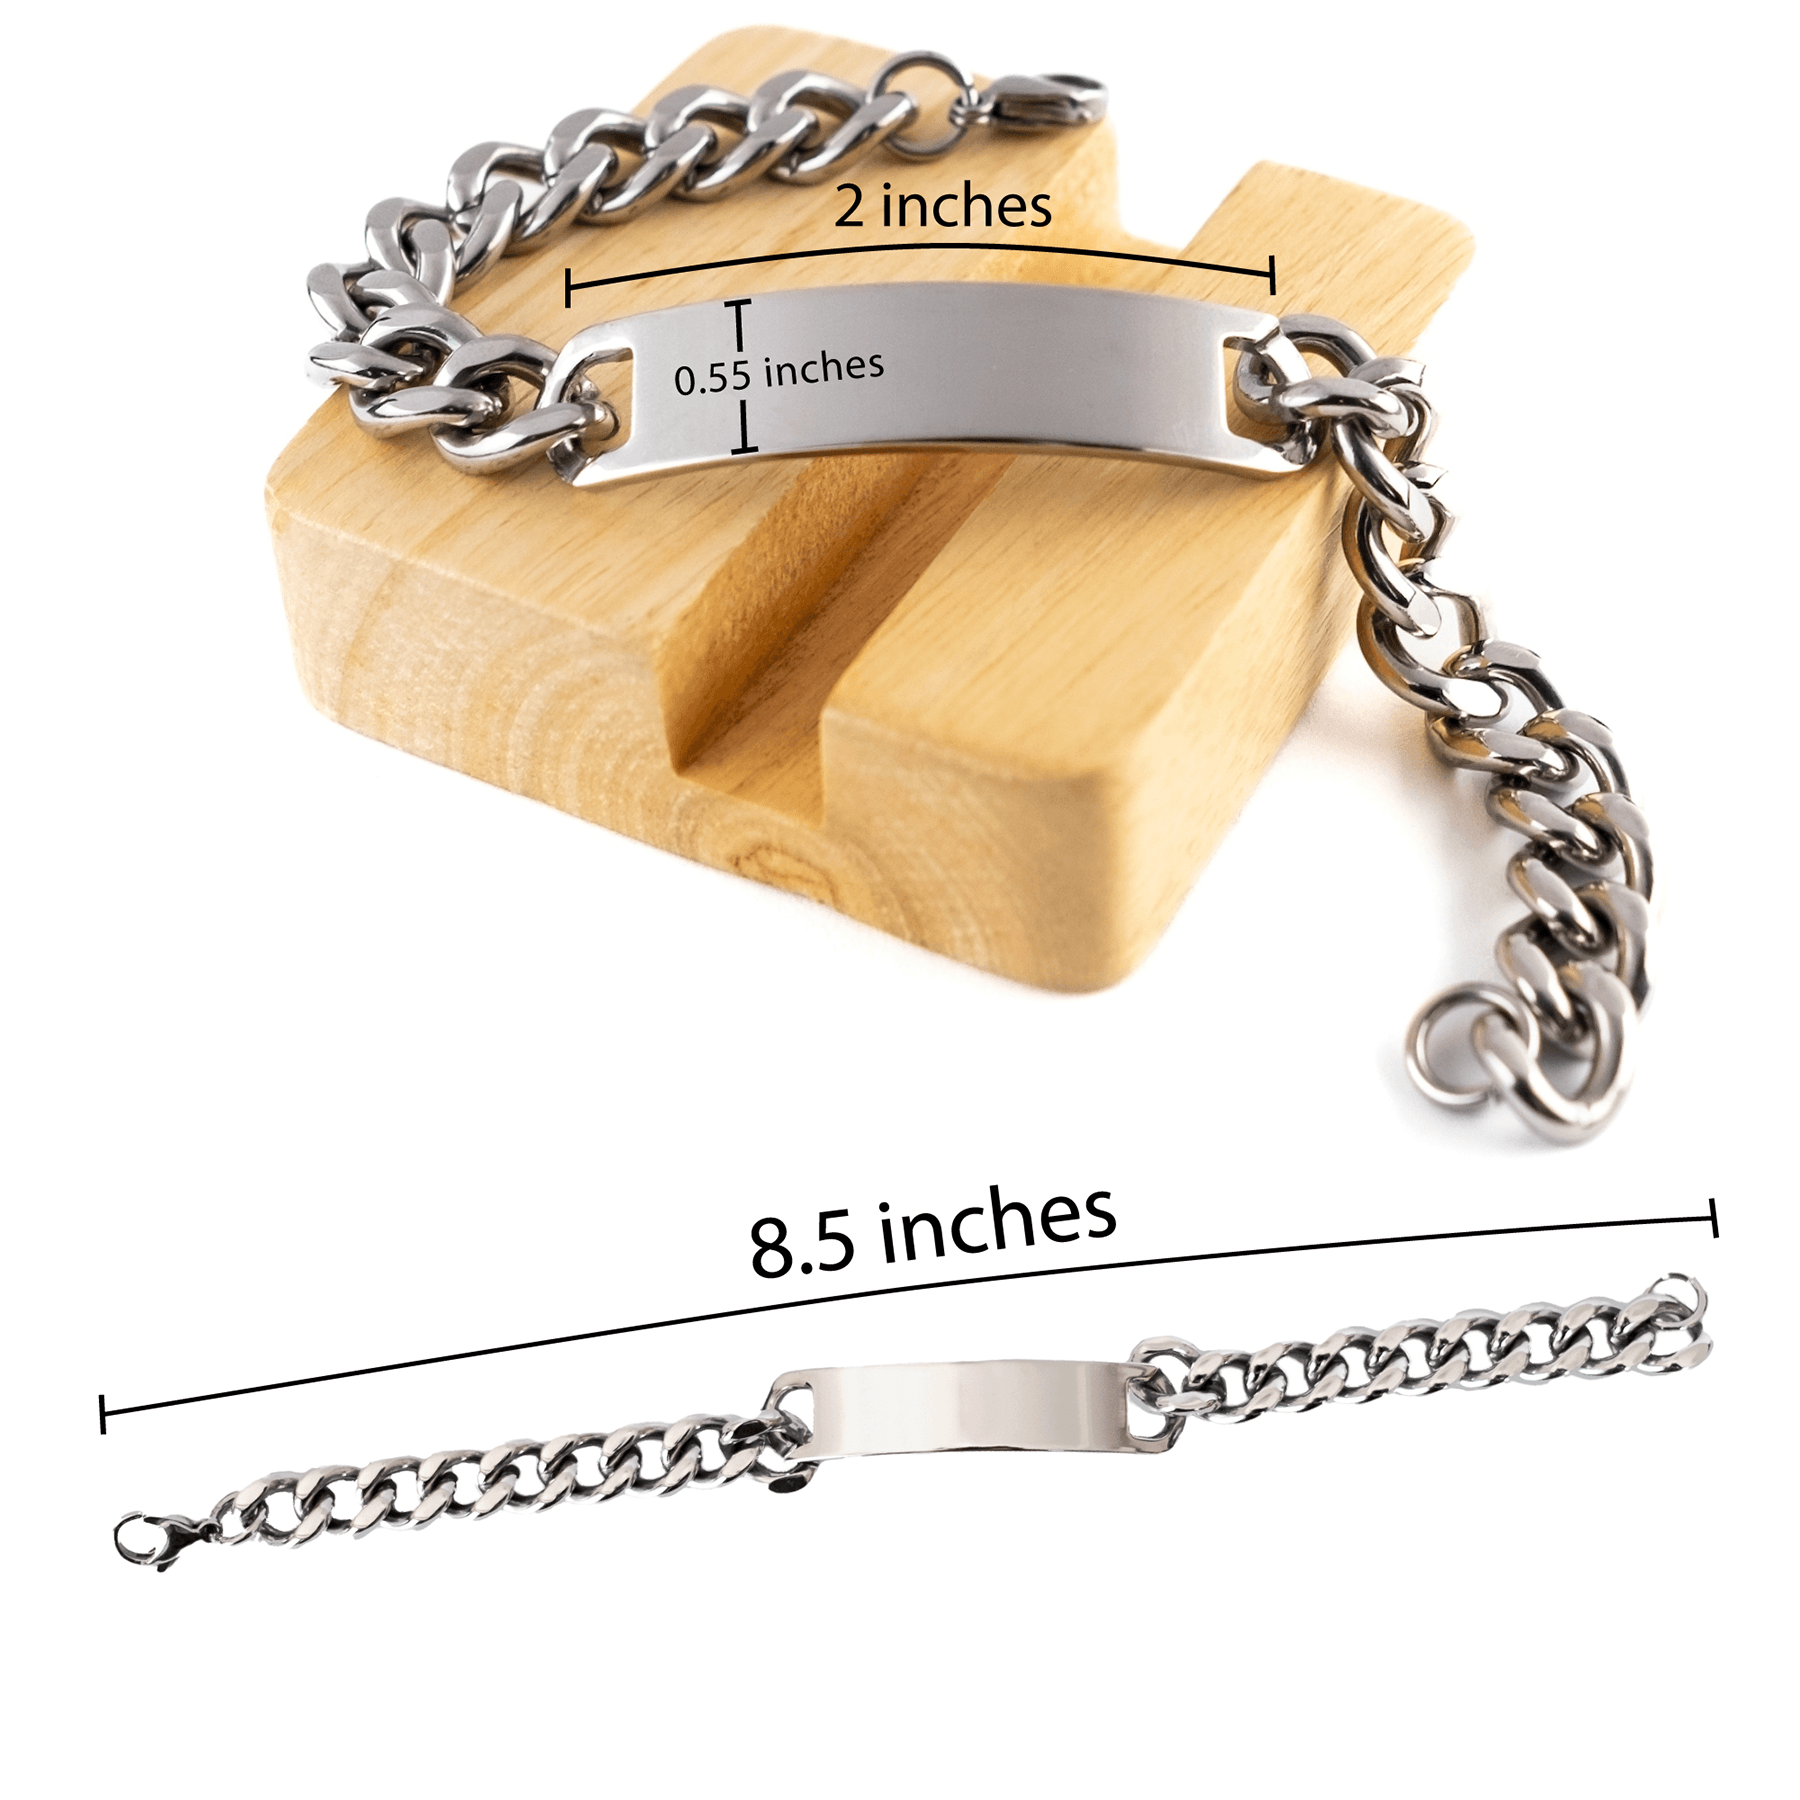 Correctional Officer Cuban Link Chain Engraved Bracelet - Thanks for being who you are - Birthday Christmas Jewelry Gifts Coworkers Colleague Boss - Mallard Moon Gift Shop